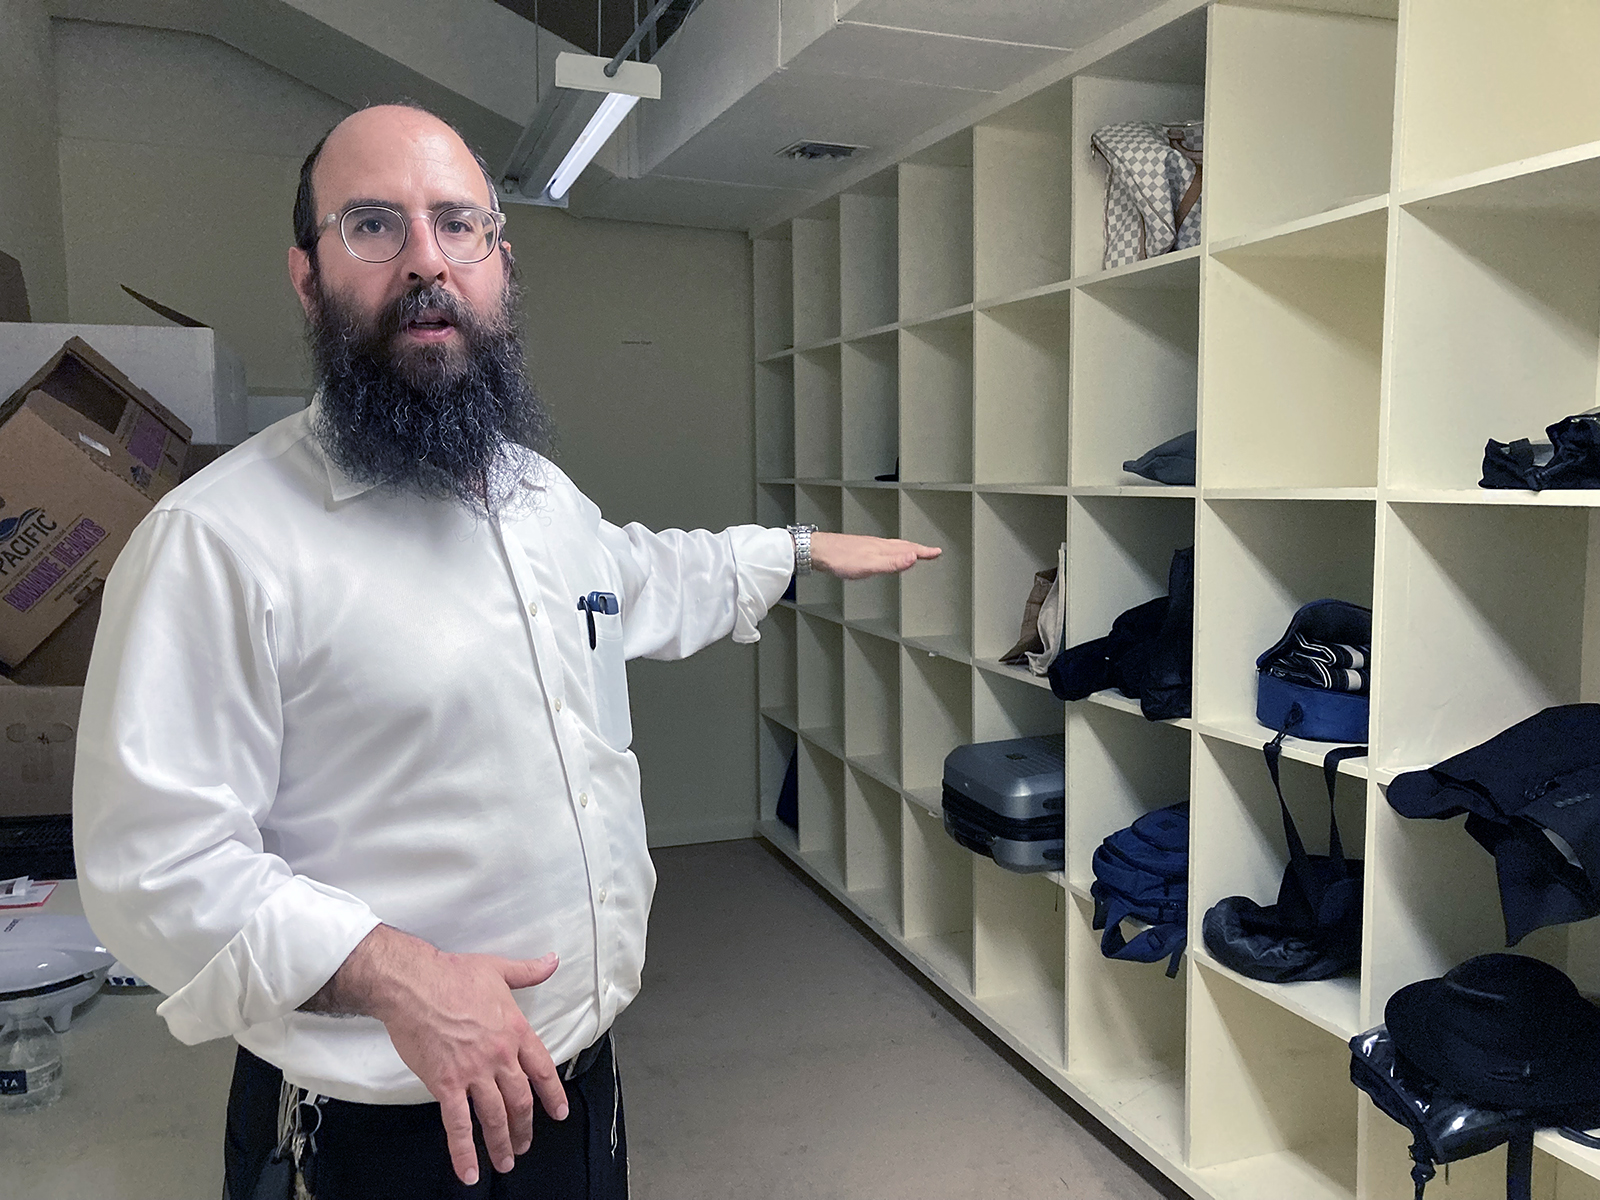 Chabad Rabbi Yosef Plotkin shows the cubbies where Jews attending the High Point Furniture Market can leave their bags during the day. RNS photo by Yonat Shimron